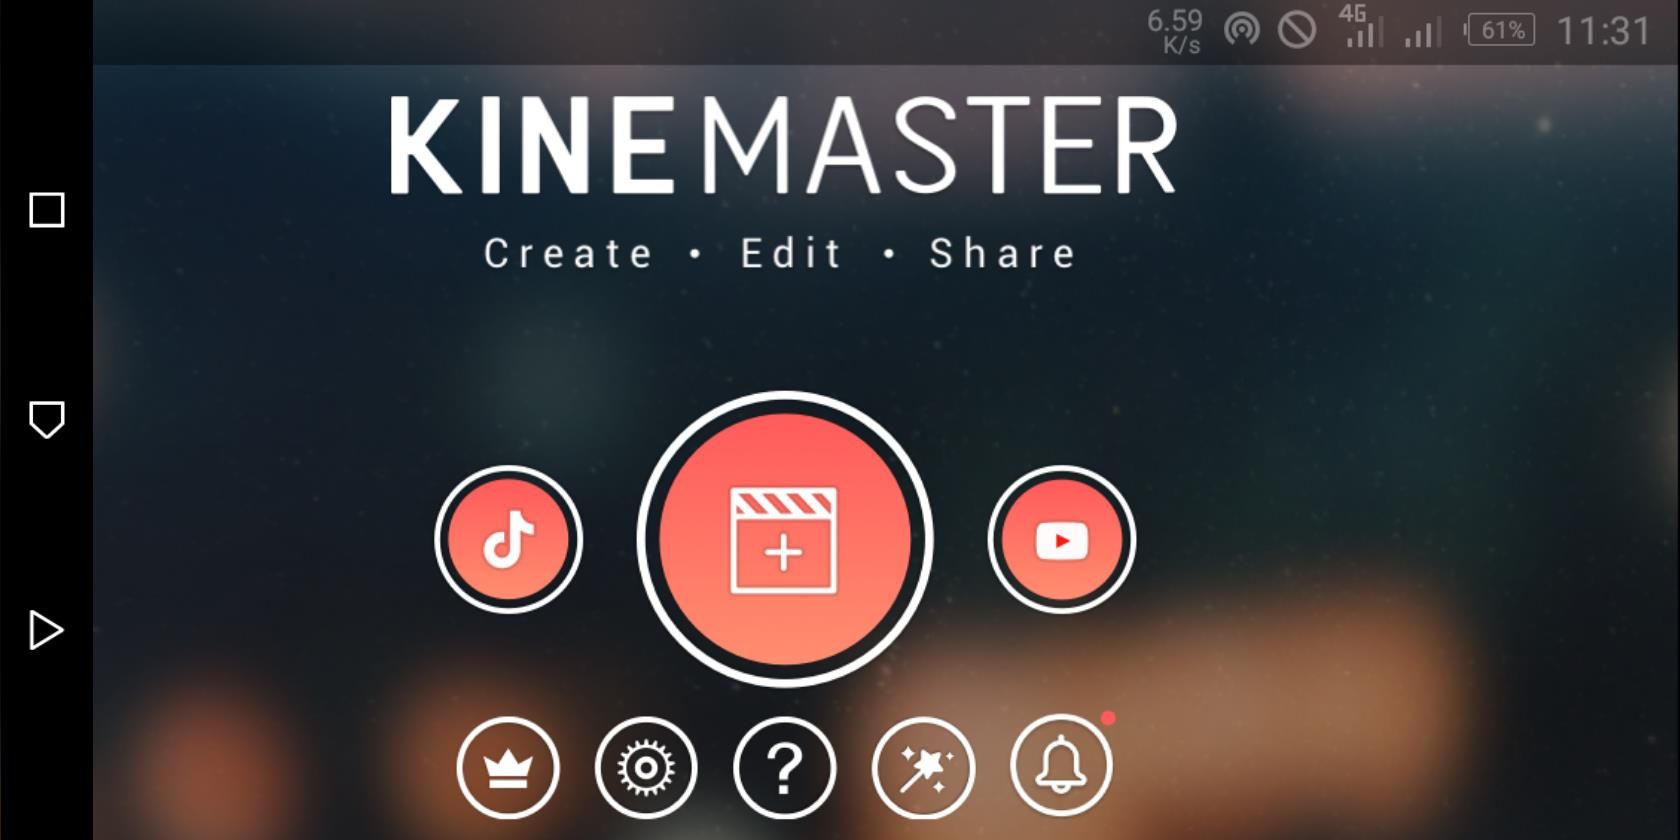 How to edit videos on your phone with kinemaster